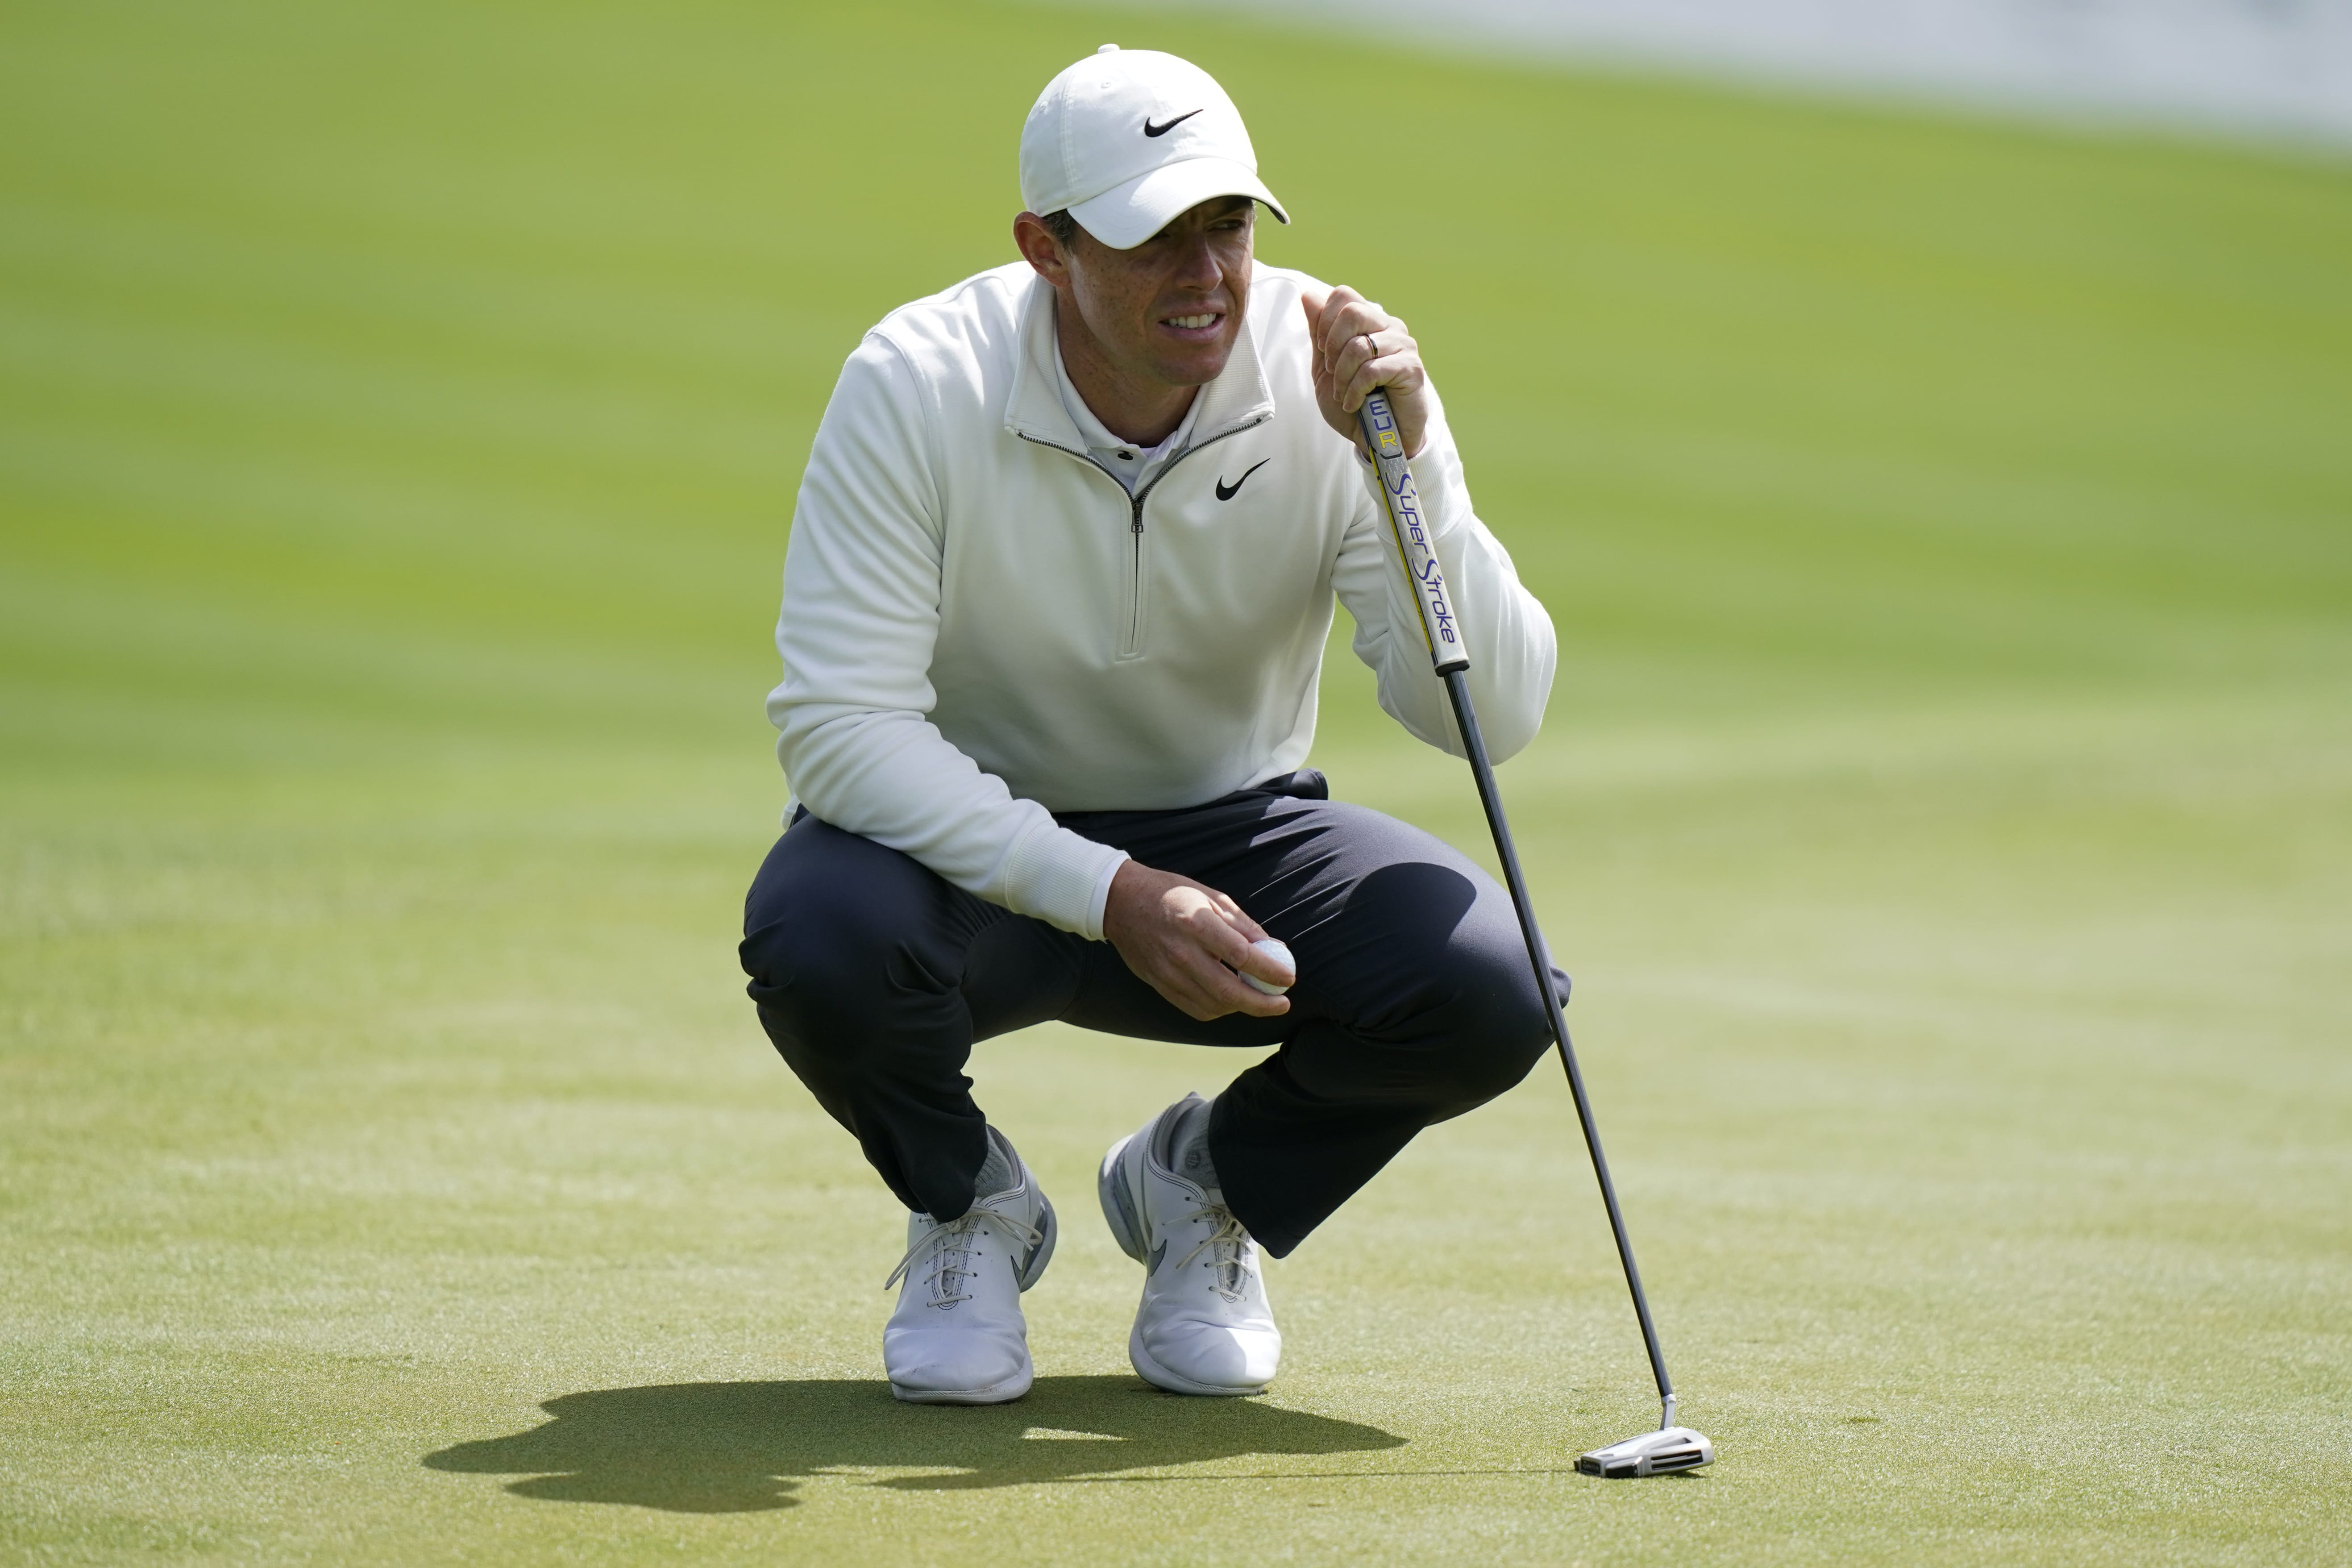 Rory McIlroy, of Northern Ireland, lines up his putt on the 18th hole during the first round of play in The Players Championship golf tournament Saturday, March 12, 2022, in Ponte Vedra Beach, Fla.